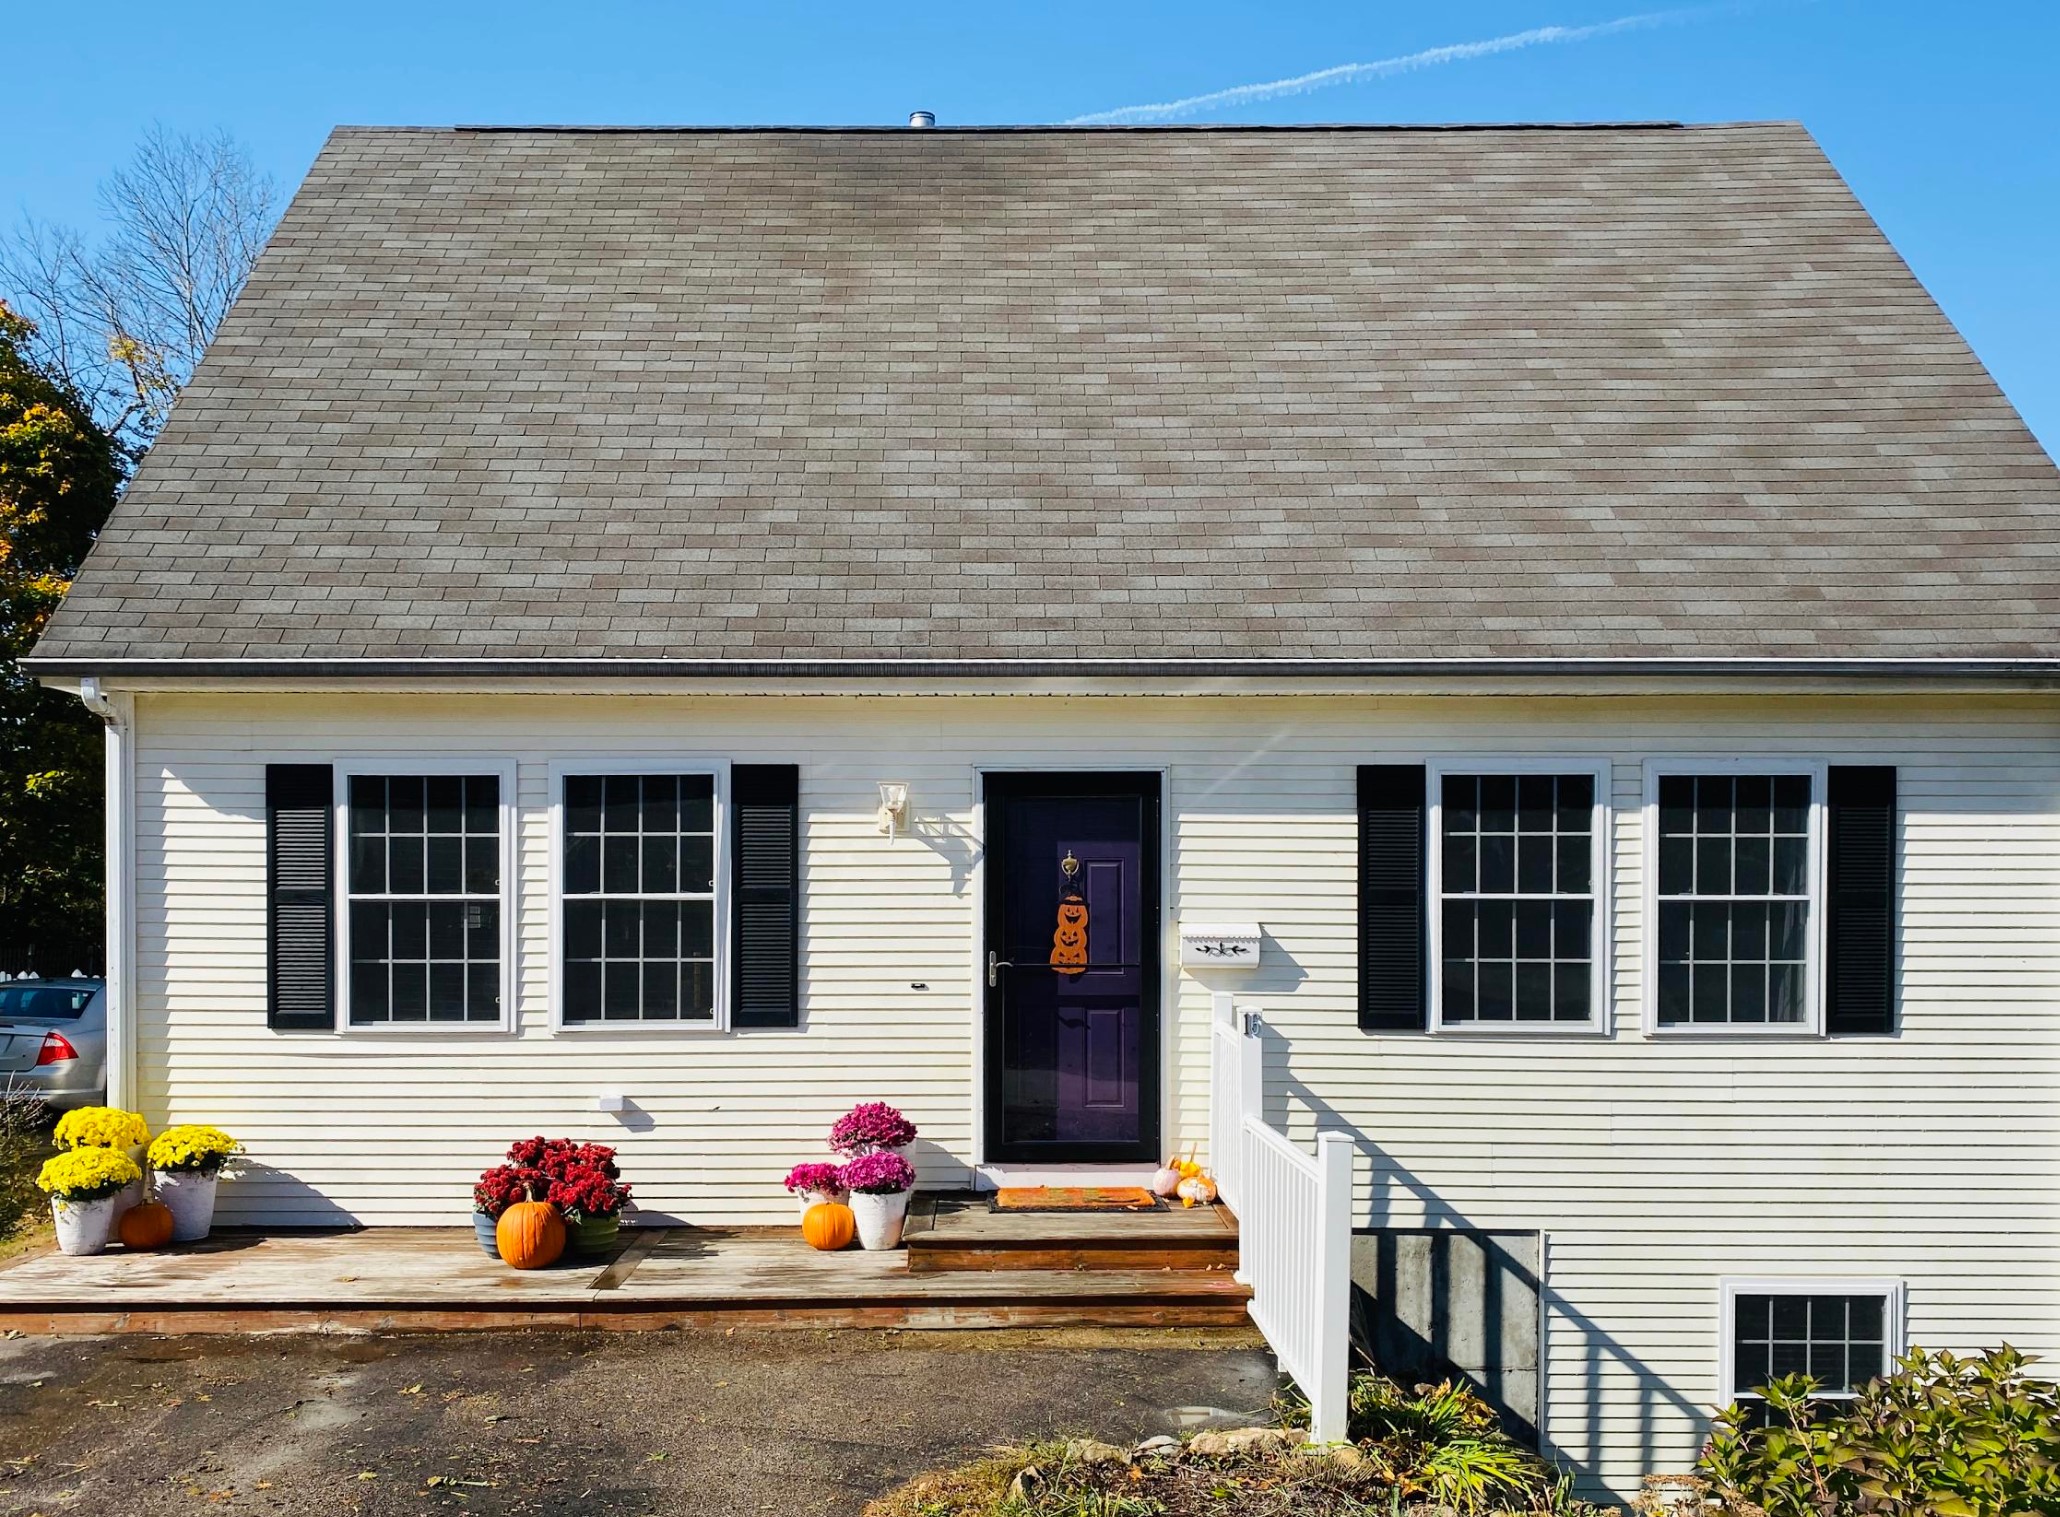 Pawcatuck Realtor Bridget Morrissey sold the Pawcatuck home for sale at 16 Thompson